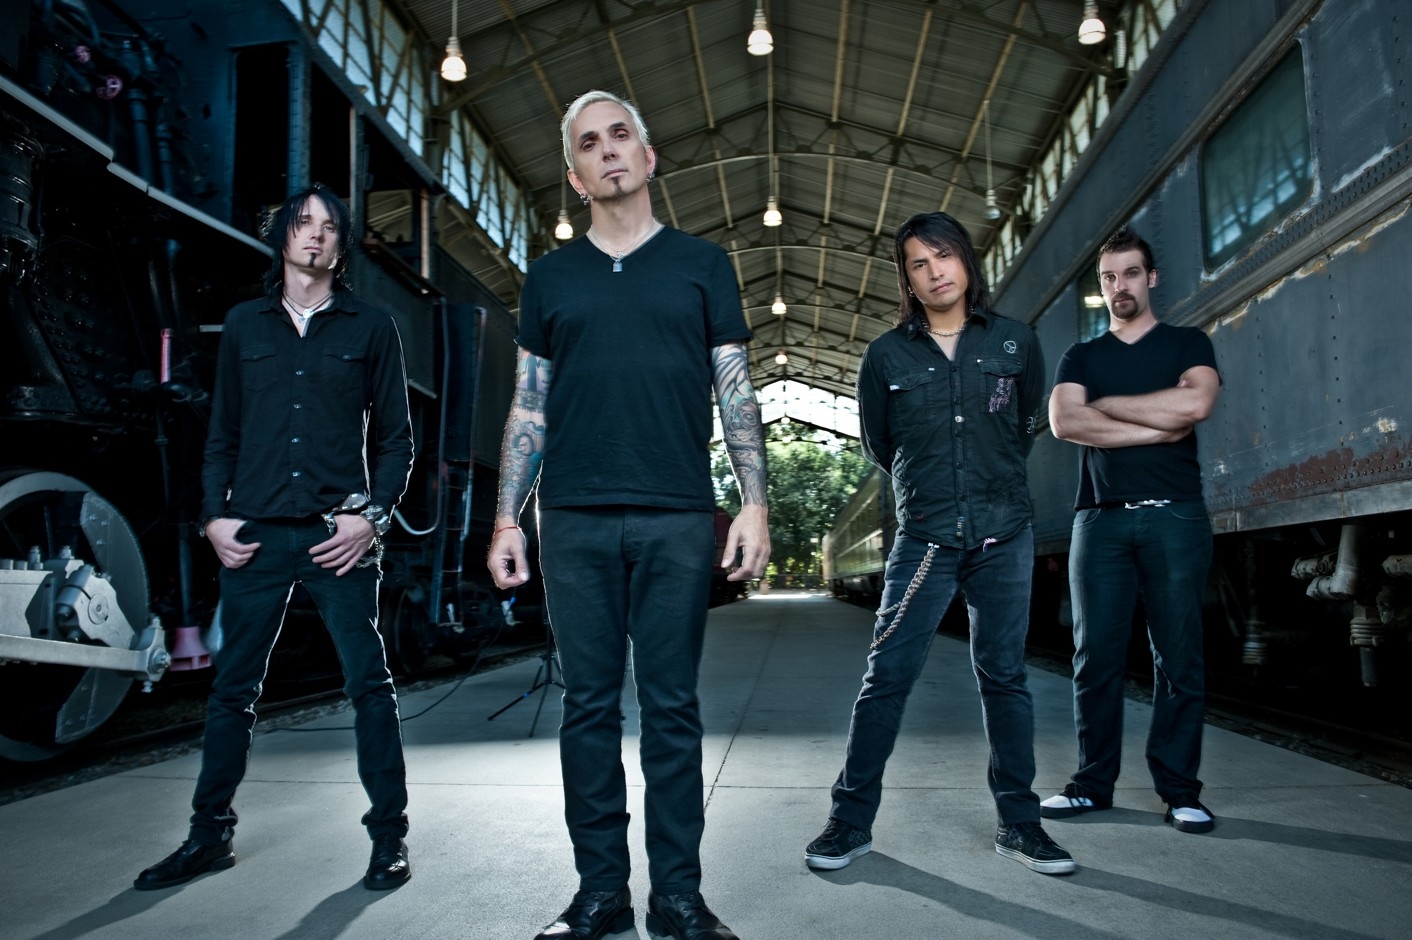 Win a chance to open for Everclear on their Australian tour!